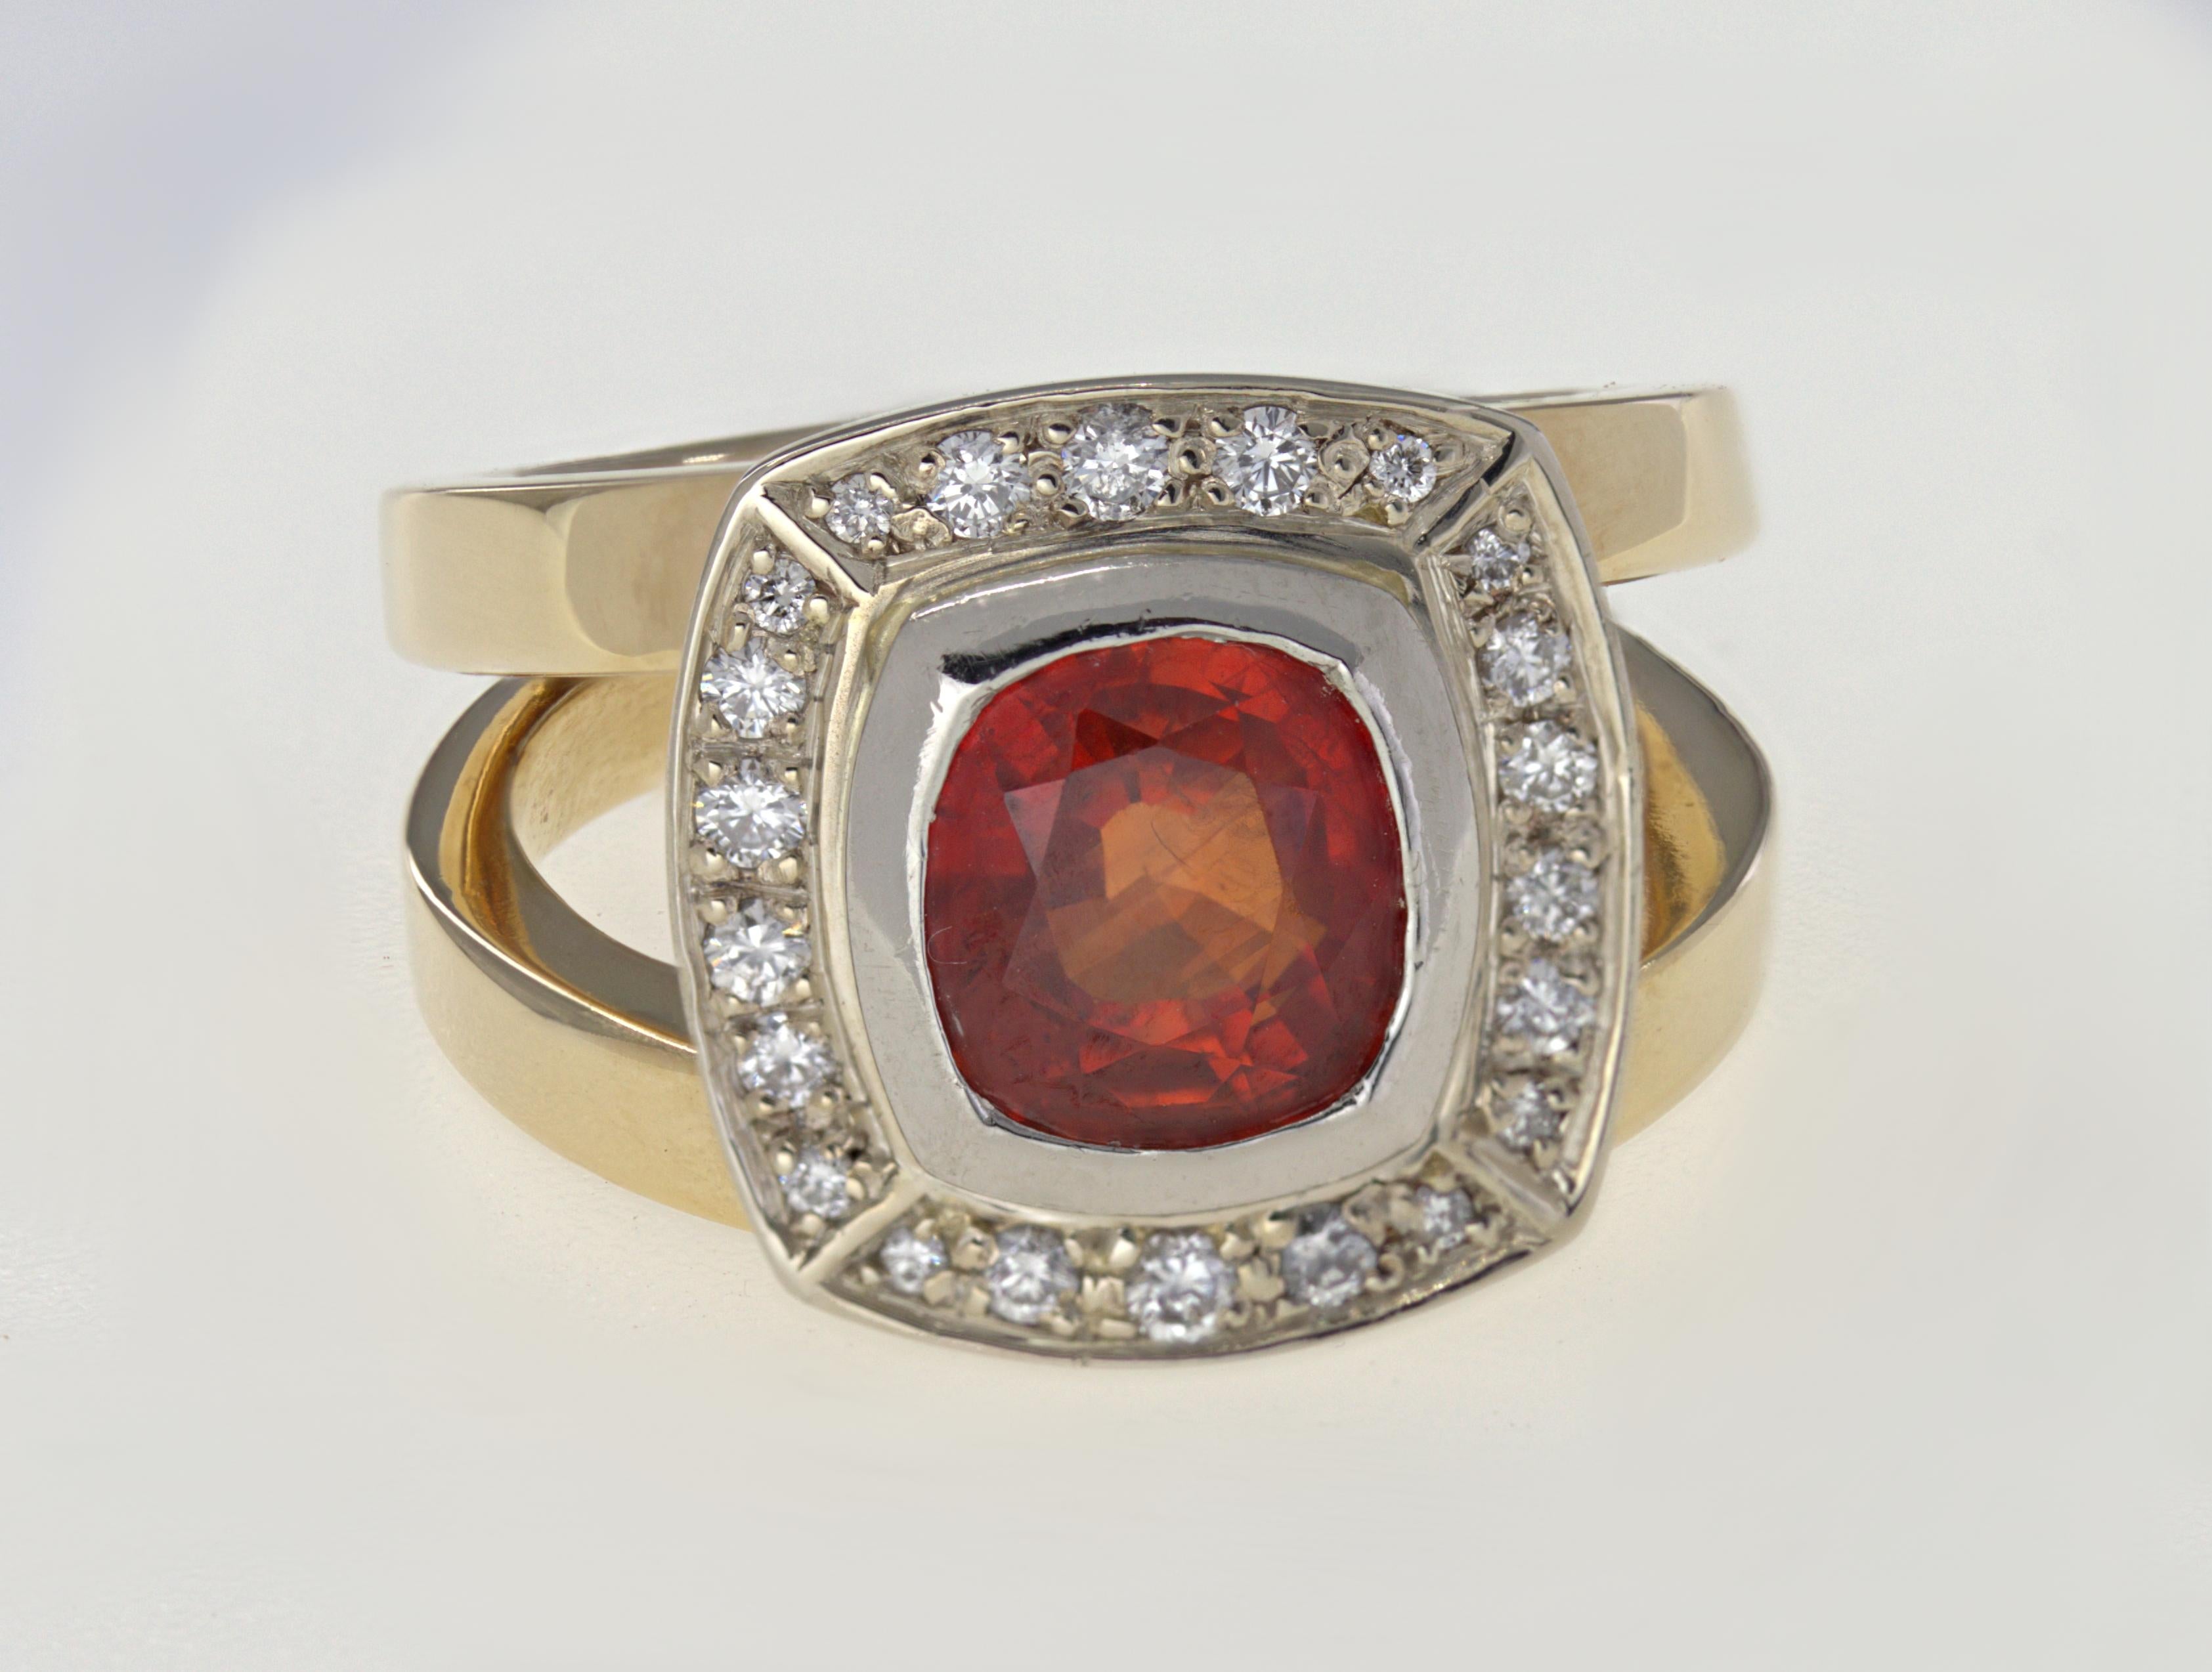 Featuring (1) square cushion-cut Malaya garnet, 2.30 cts. tw., surrounded by (26) full-cut diamonds, 0.40 ct. tw., SI, I-J, set in a palladium top, completed by a 14k yellow gold split shank, mounting, tapering from 11.9 mm to 2.4 mm, size 6.5,